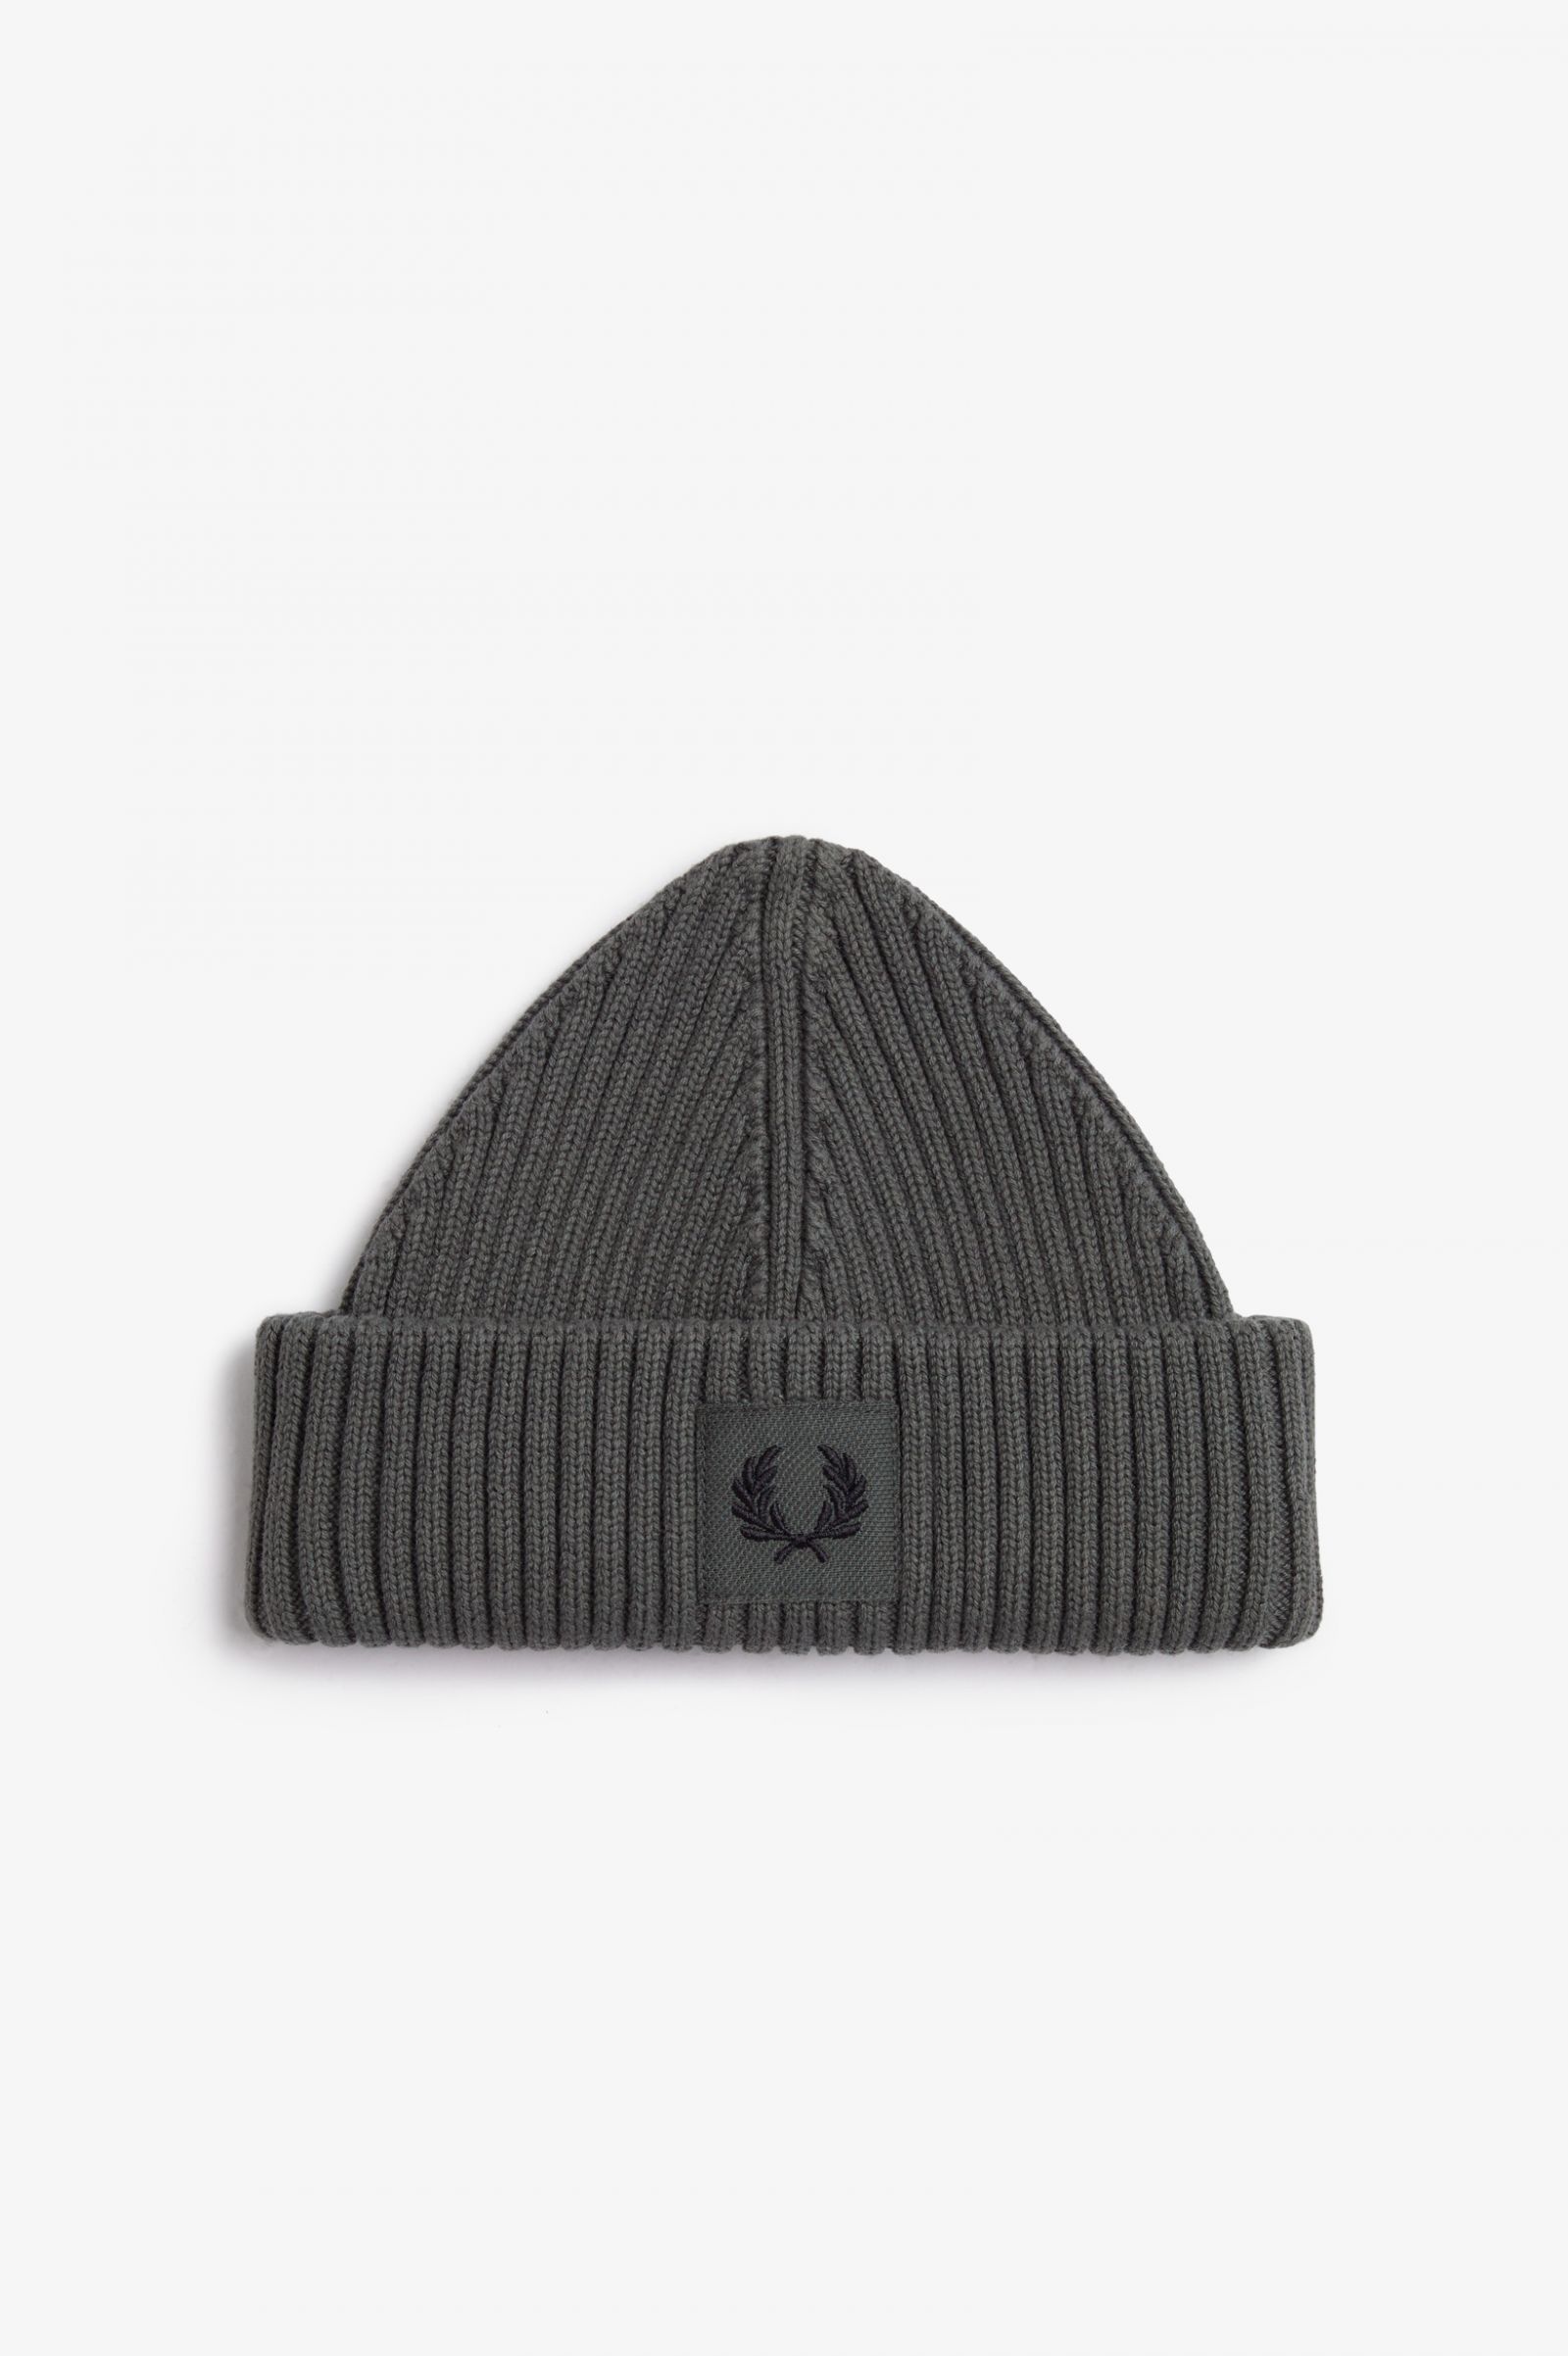 Fred Perry Branded Patch Ribbed Beanie in Field Green/Black